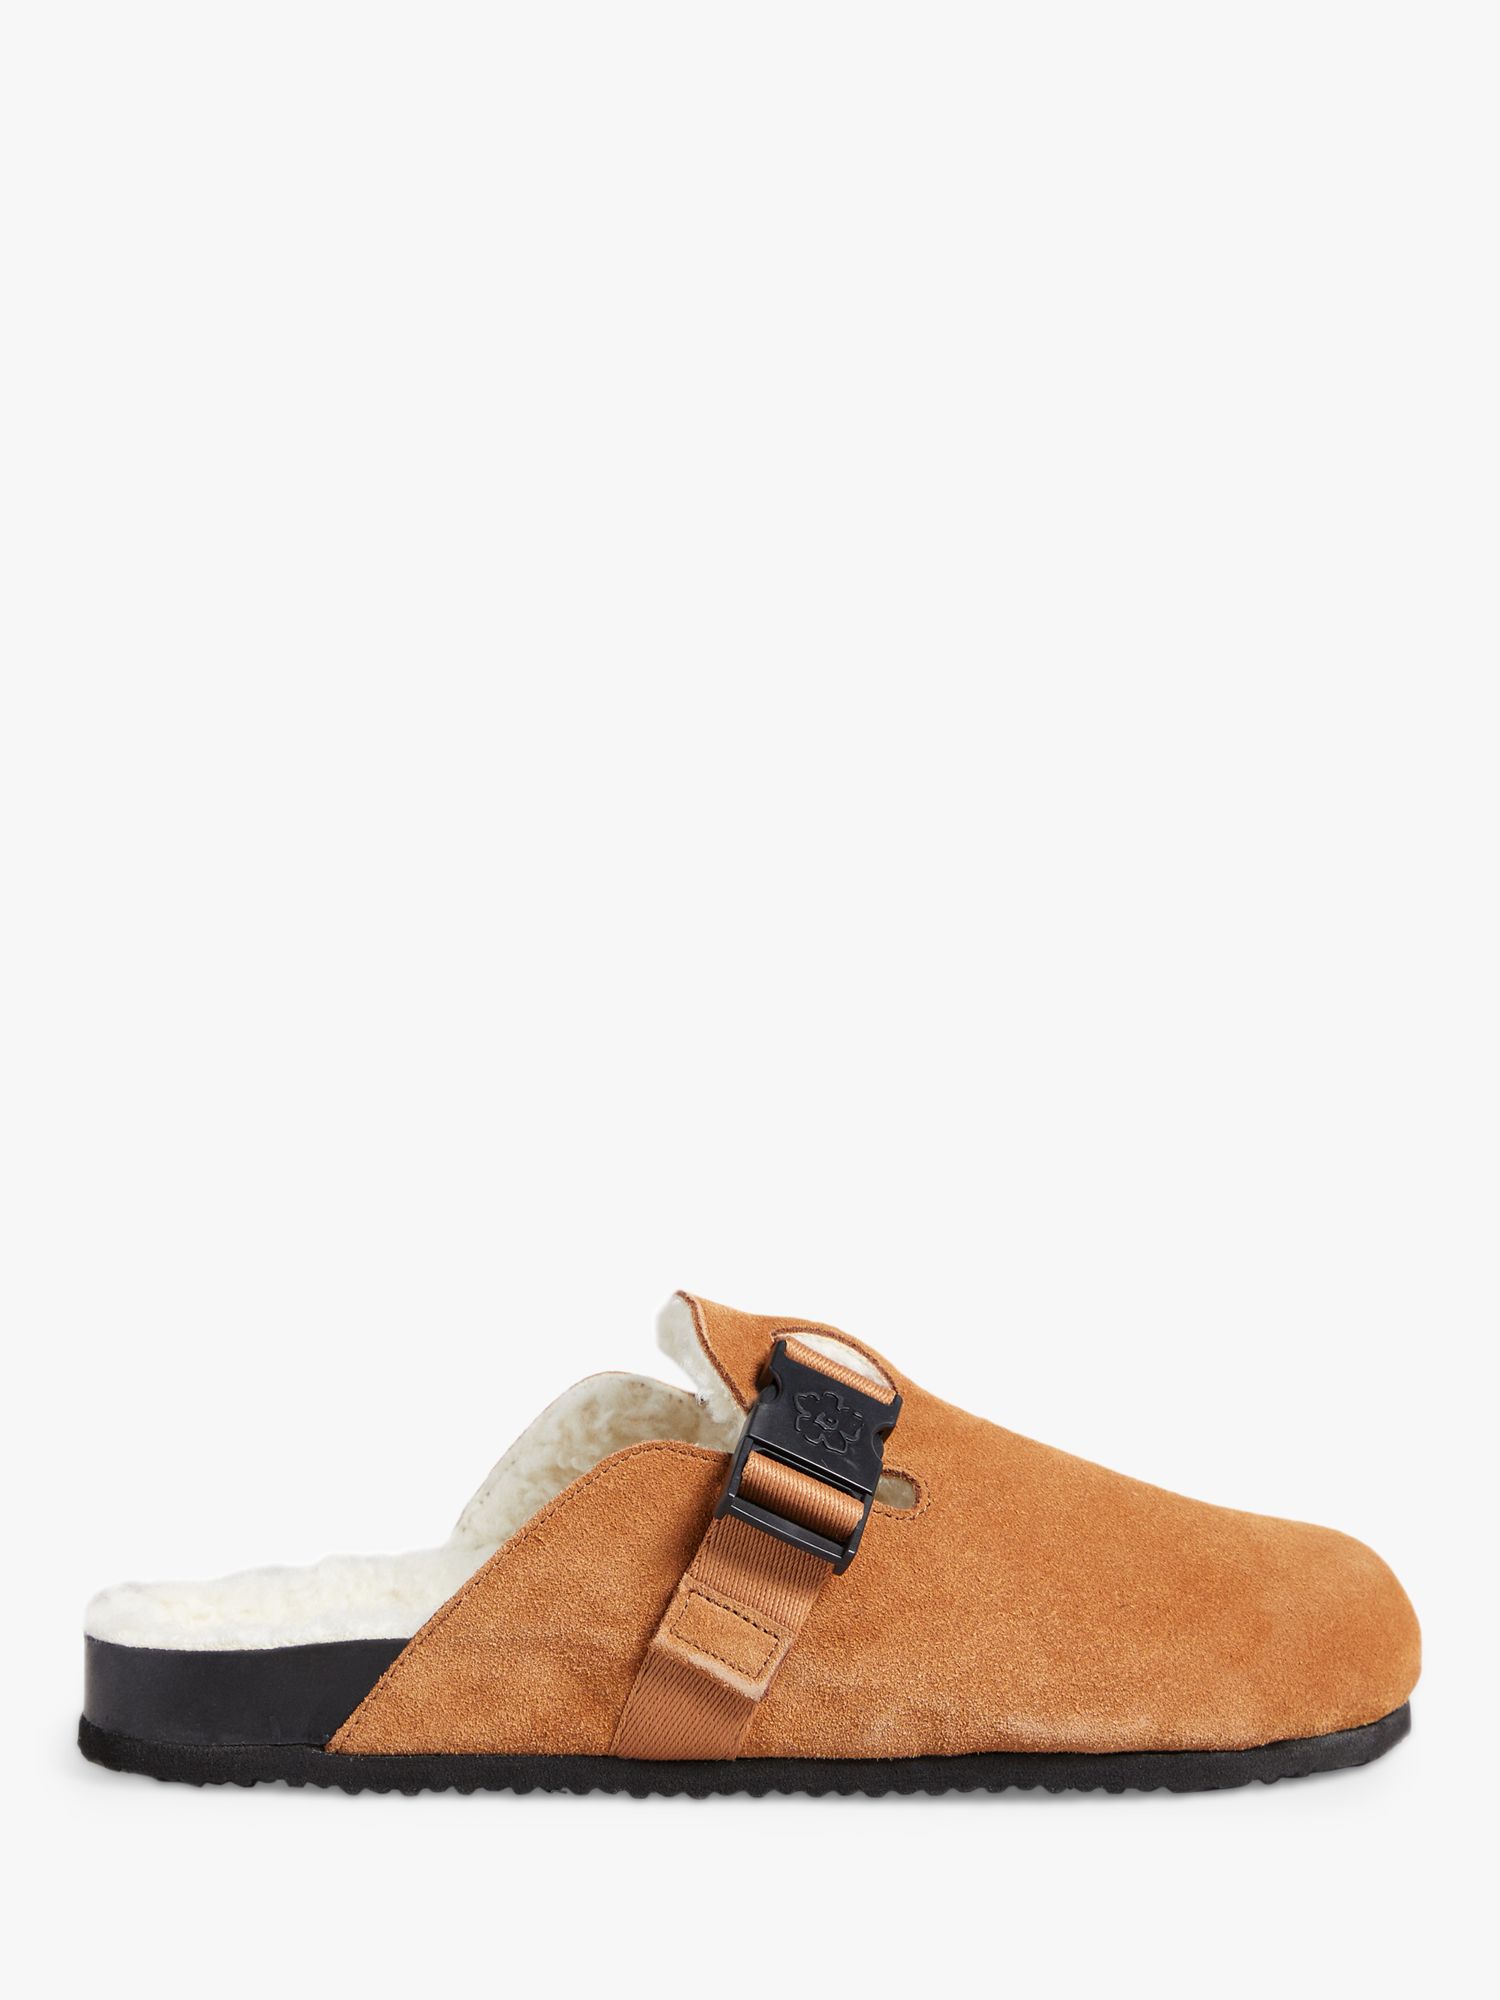 Ted Baker Ruefus Moccasin Suede Slippers